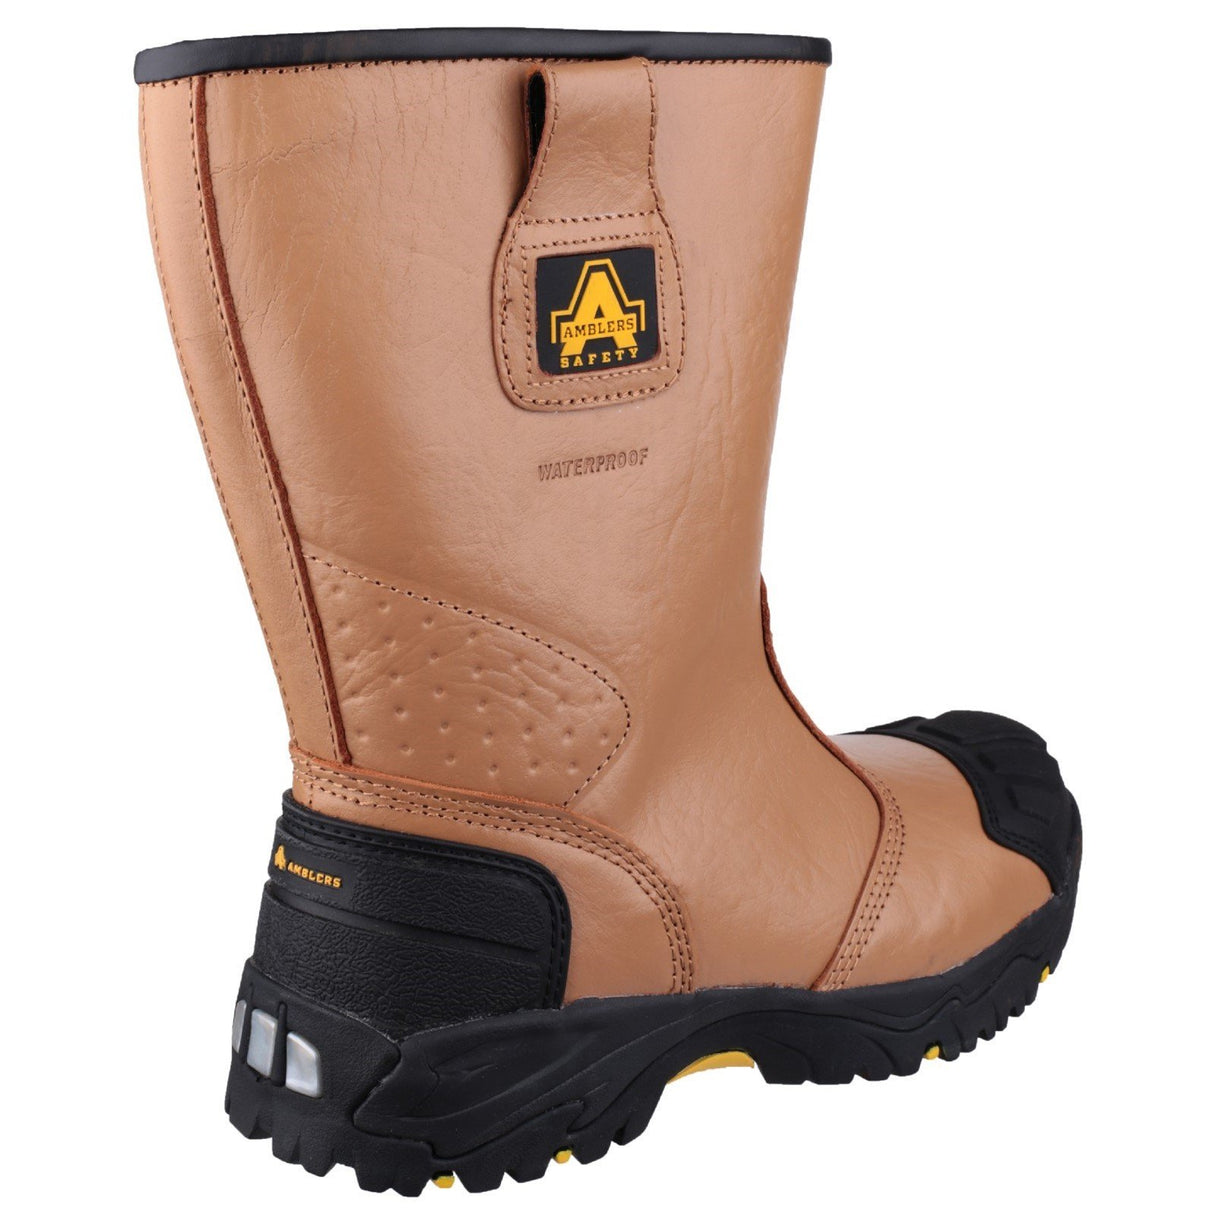 Amblers Safety Waterproof Scuff Cap Pull On Rigger Safety Boots